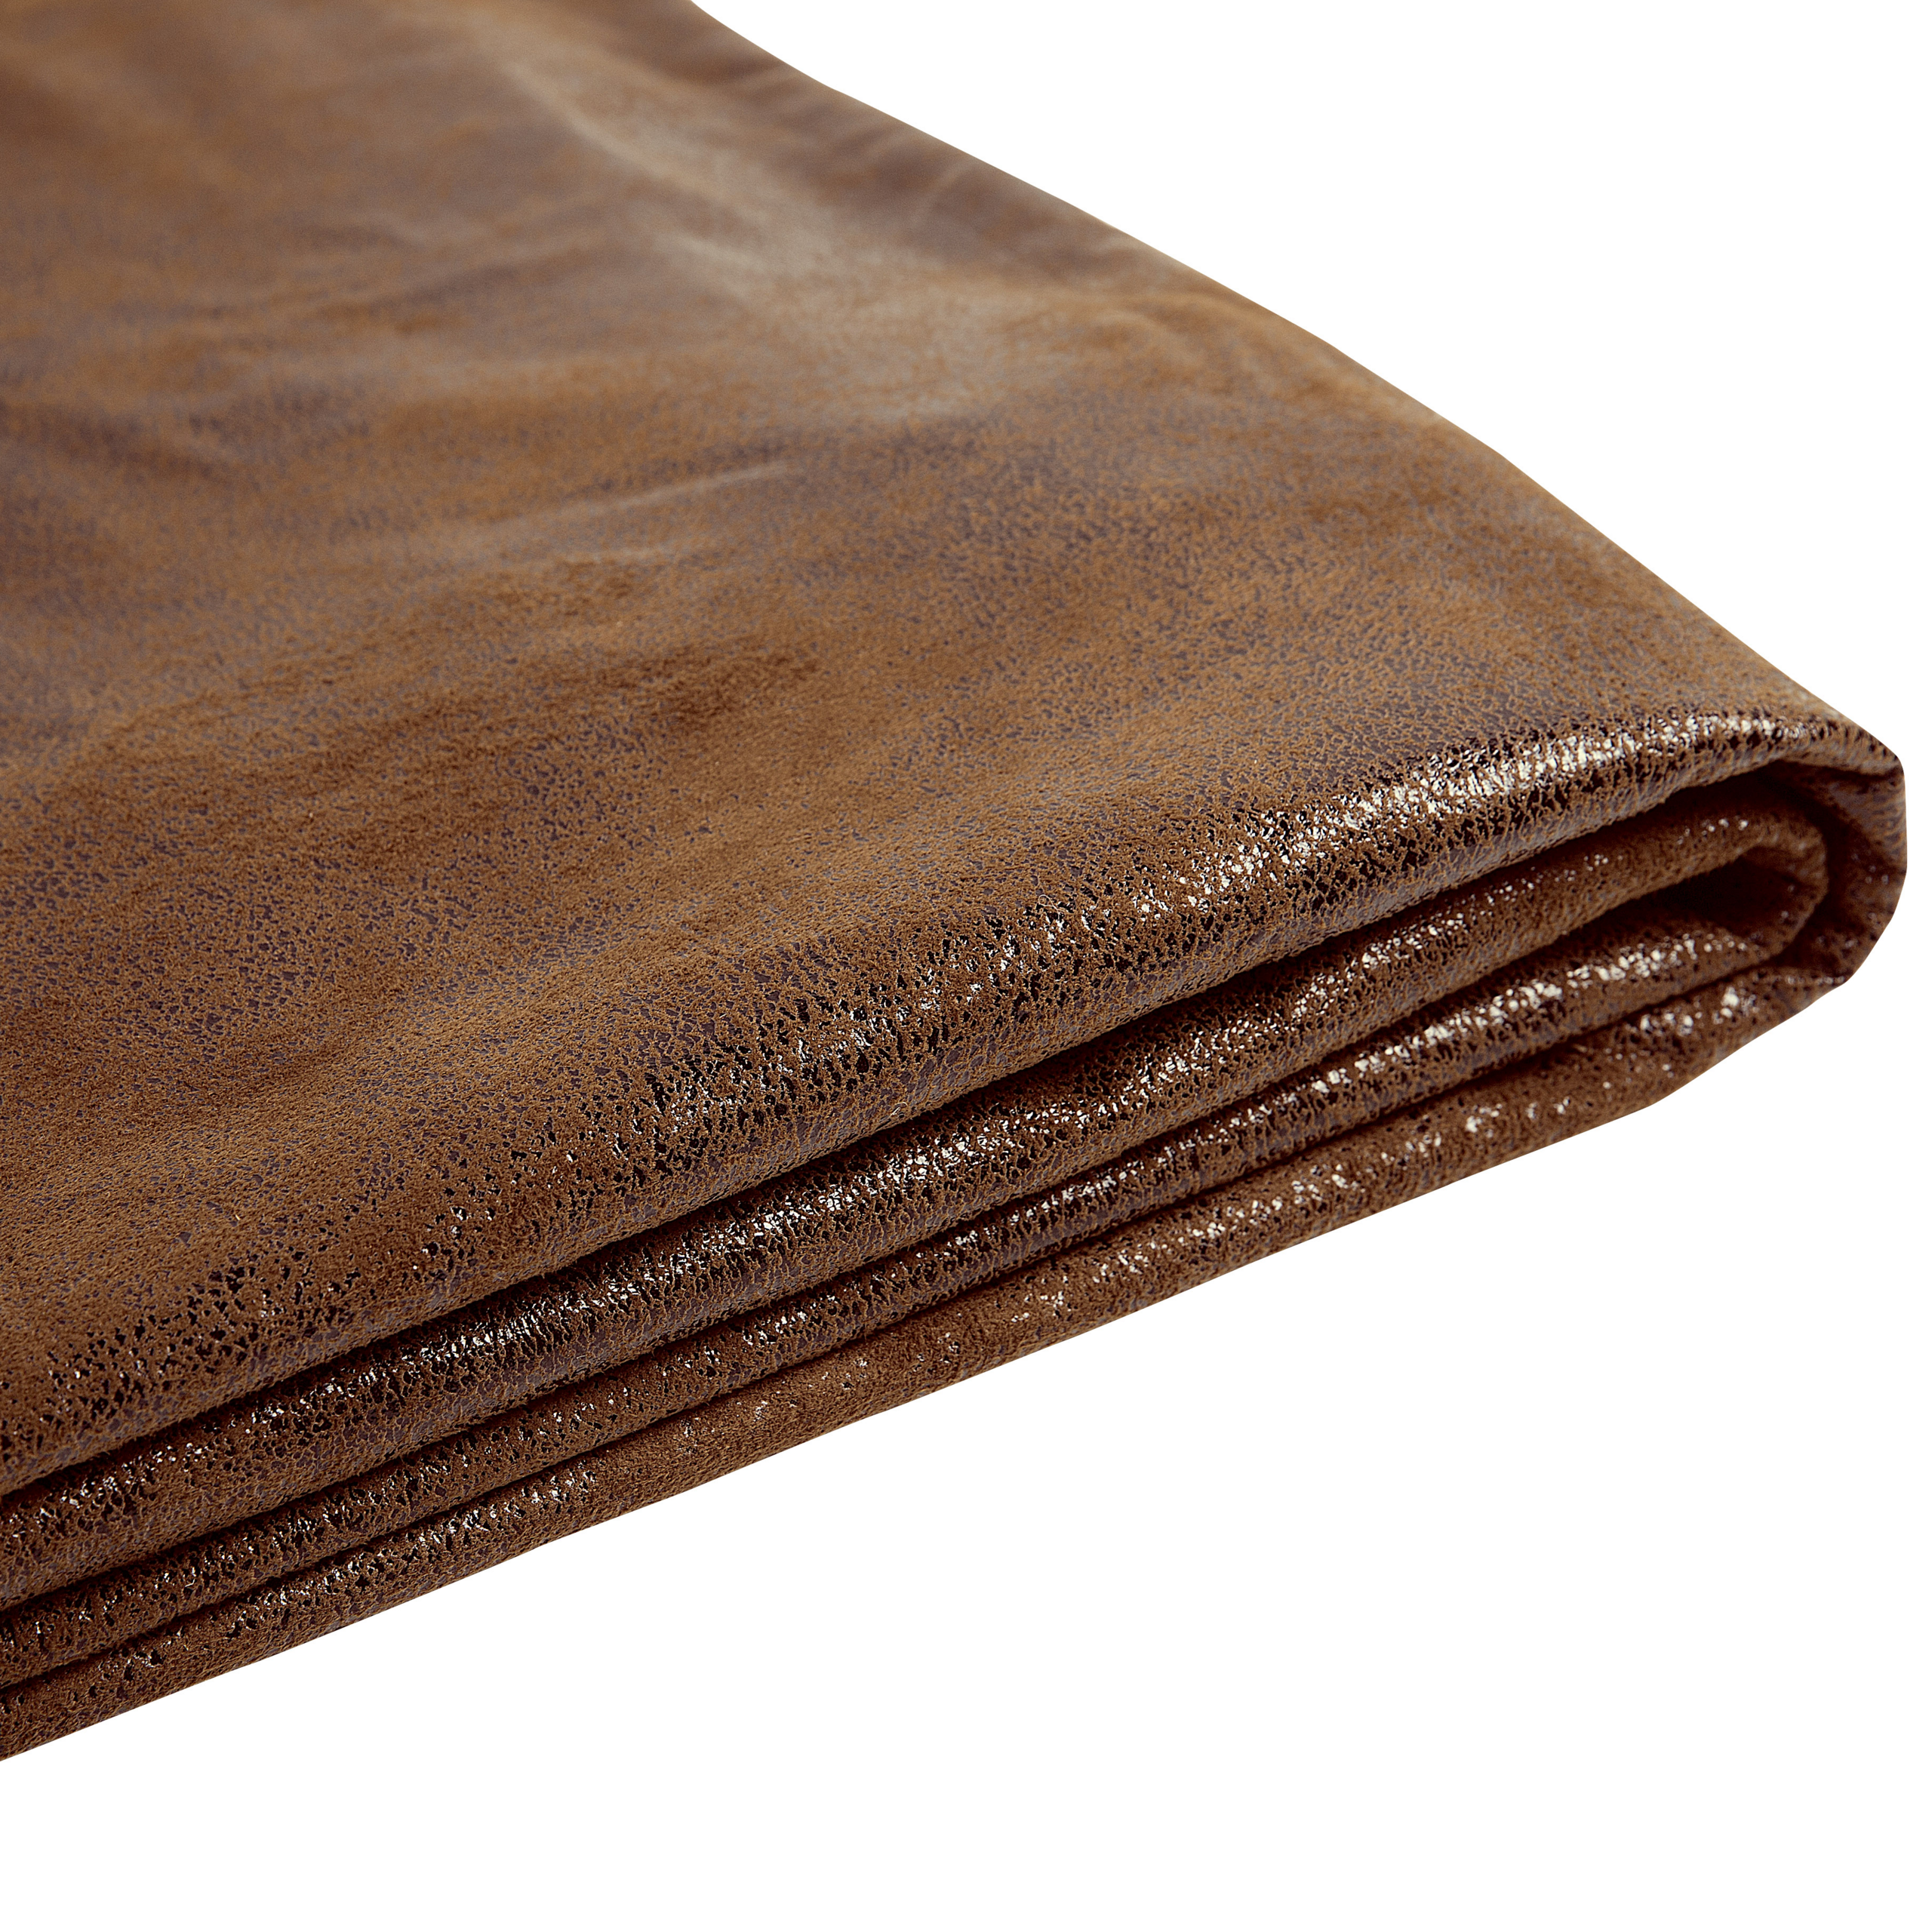 Beliani Bed Frame Cover Brown Faux Leather for Bed 180 x 200 cm Removable Washable